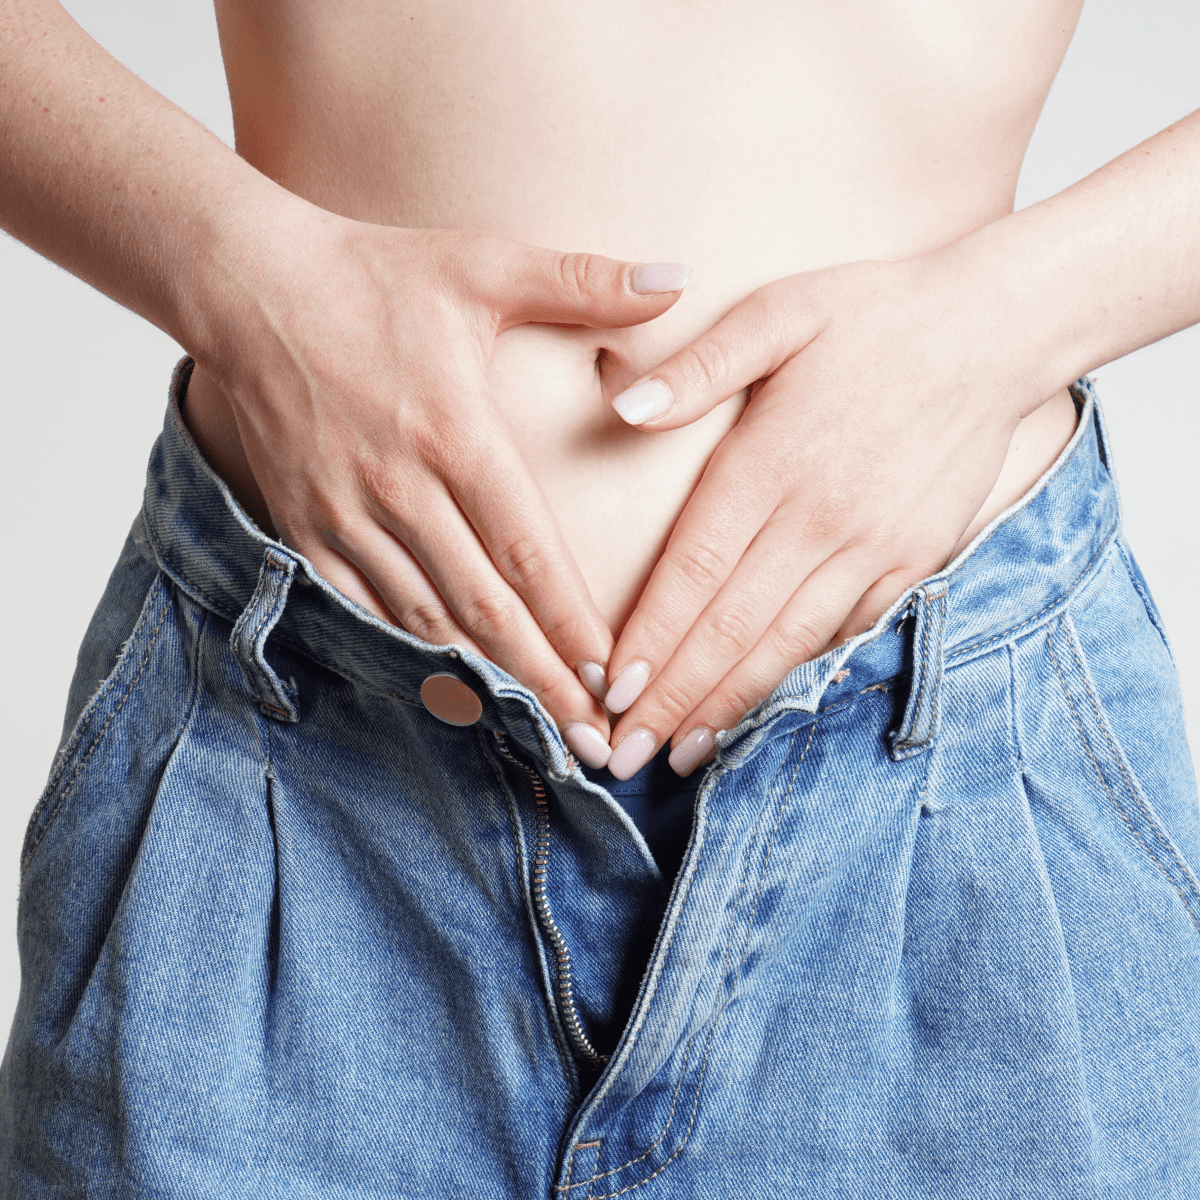 14 Early Signs of Pregnancy and How Your Stomach Feels